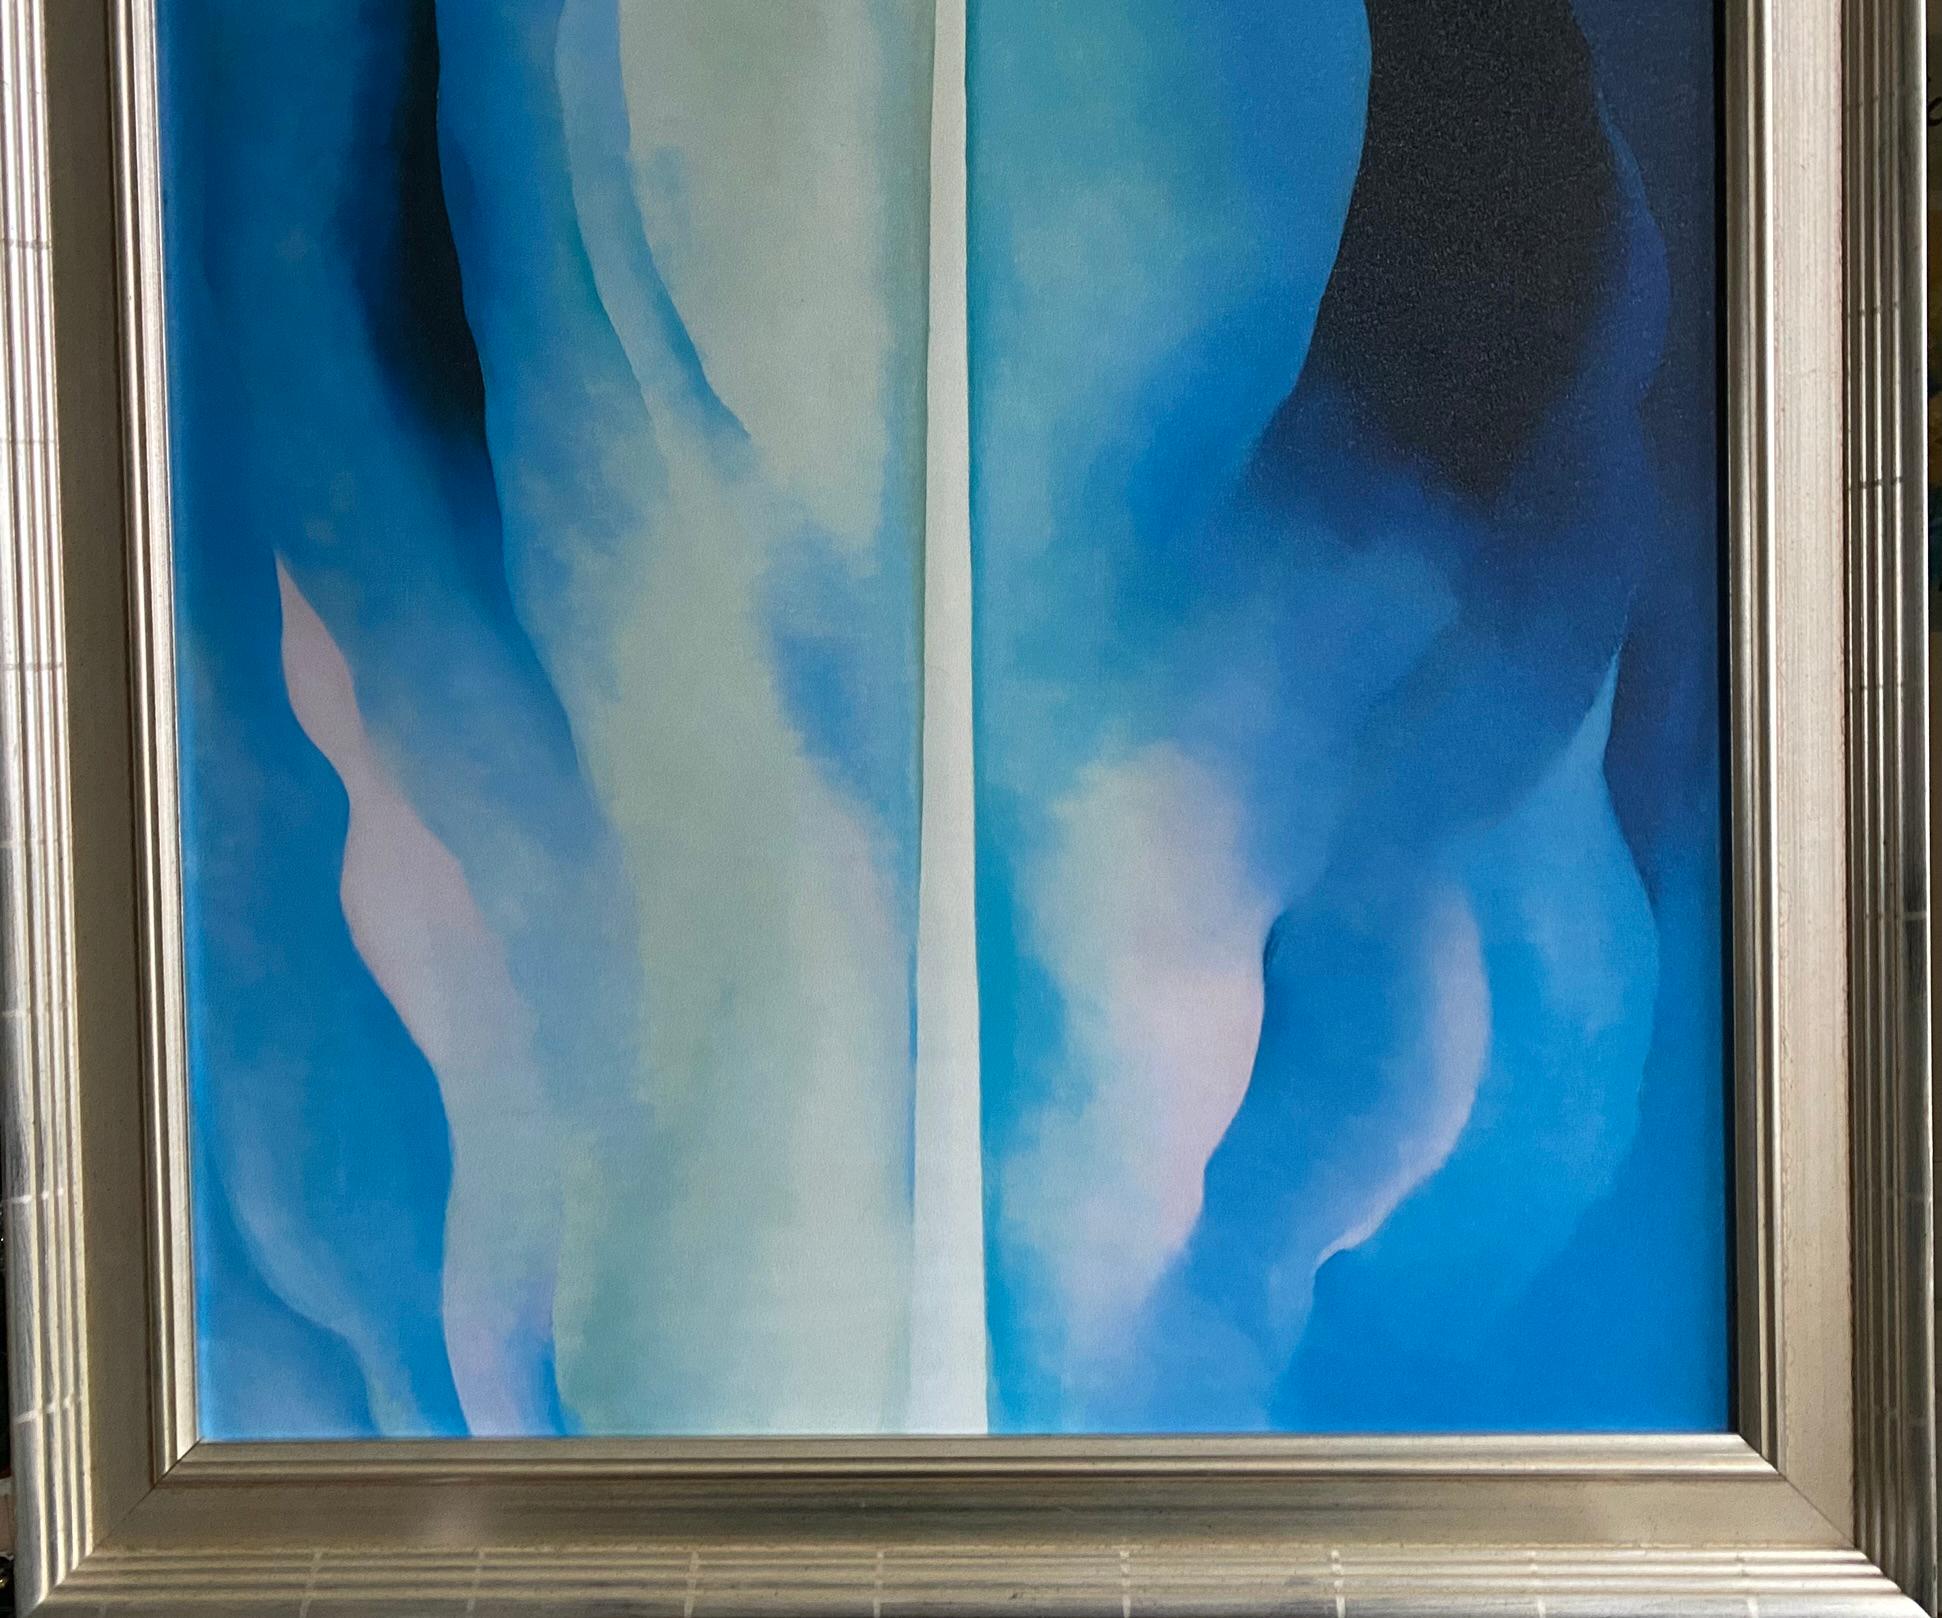 Georgia O'Keeffe-High Quality print by MoMA circa1997-Abstraction Blue-GSYStudio For Sale 8